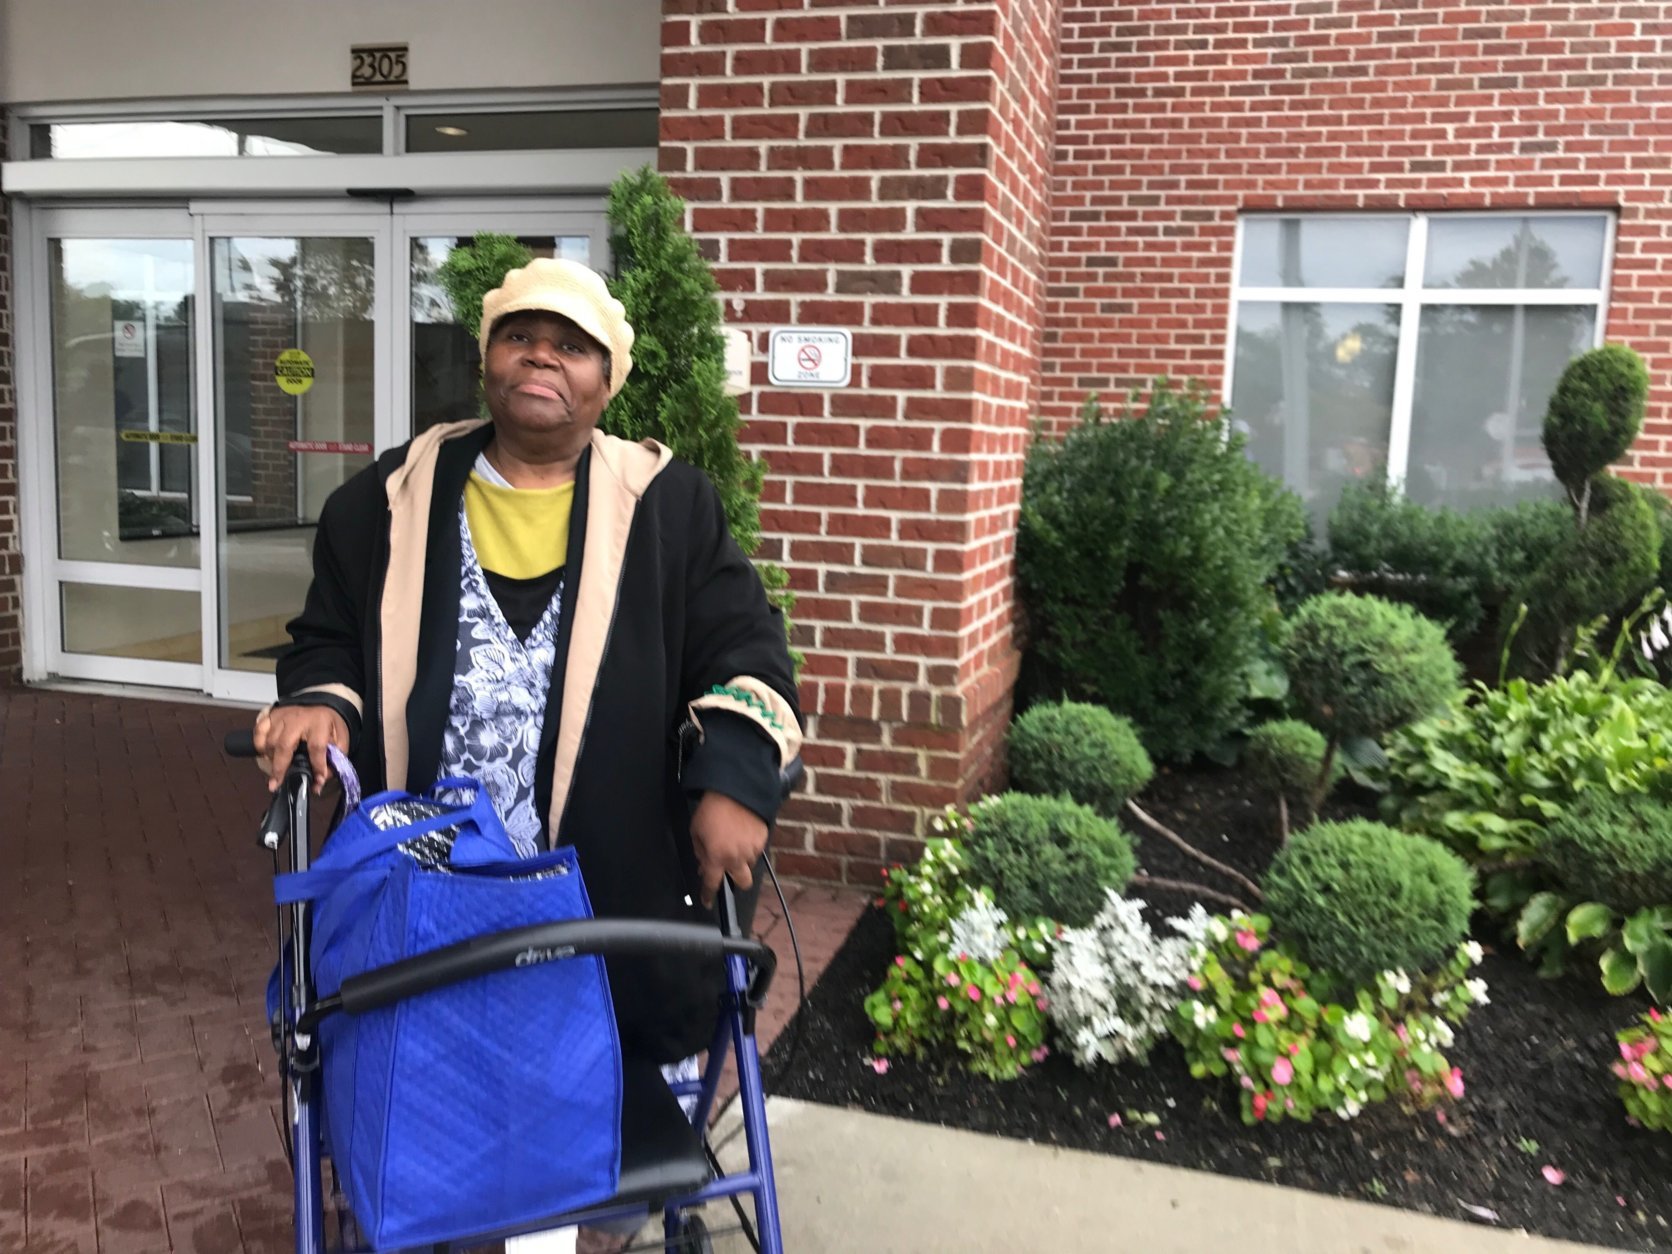 Carolyn Rogers is temporarily residing at a hotel on New York Ave NE in the aftermath of the fire that drove her and over 100 seniors from the Arthur Capper Senior Apartments last month. (WTOP/Dick Uliano)